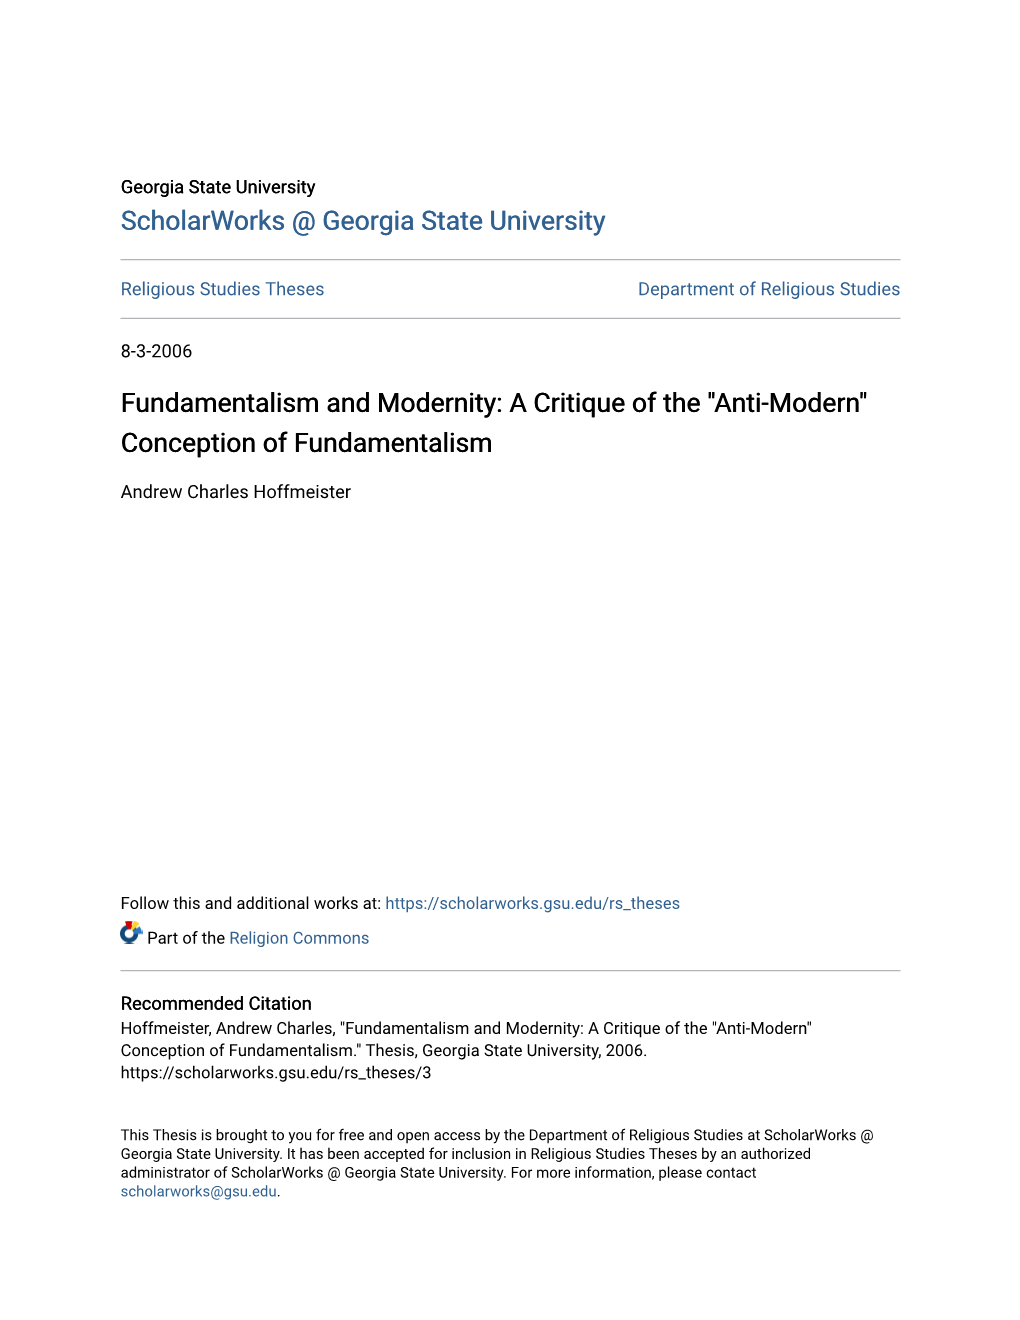 Fundamentalism and Modernity: a Critique of the "Anti-Modern" Conception of Fundamentalism